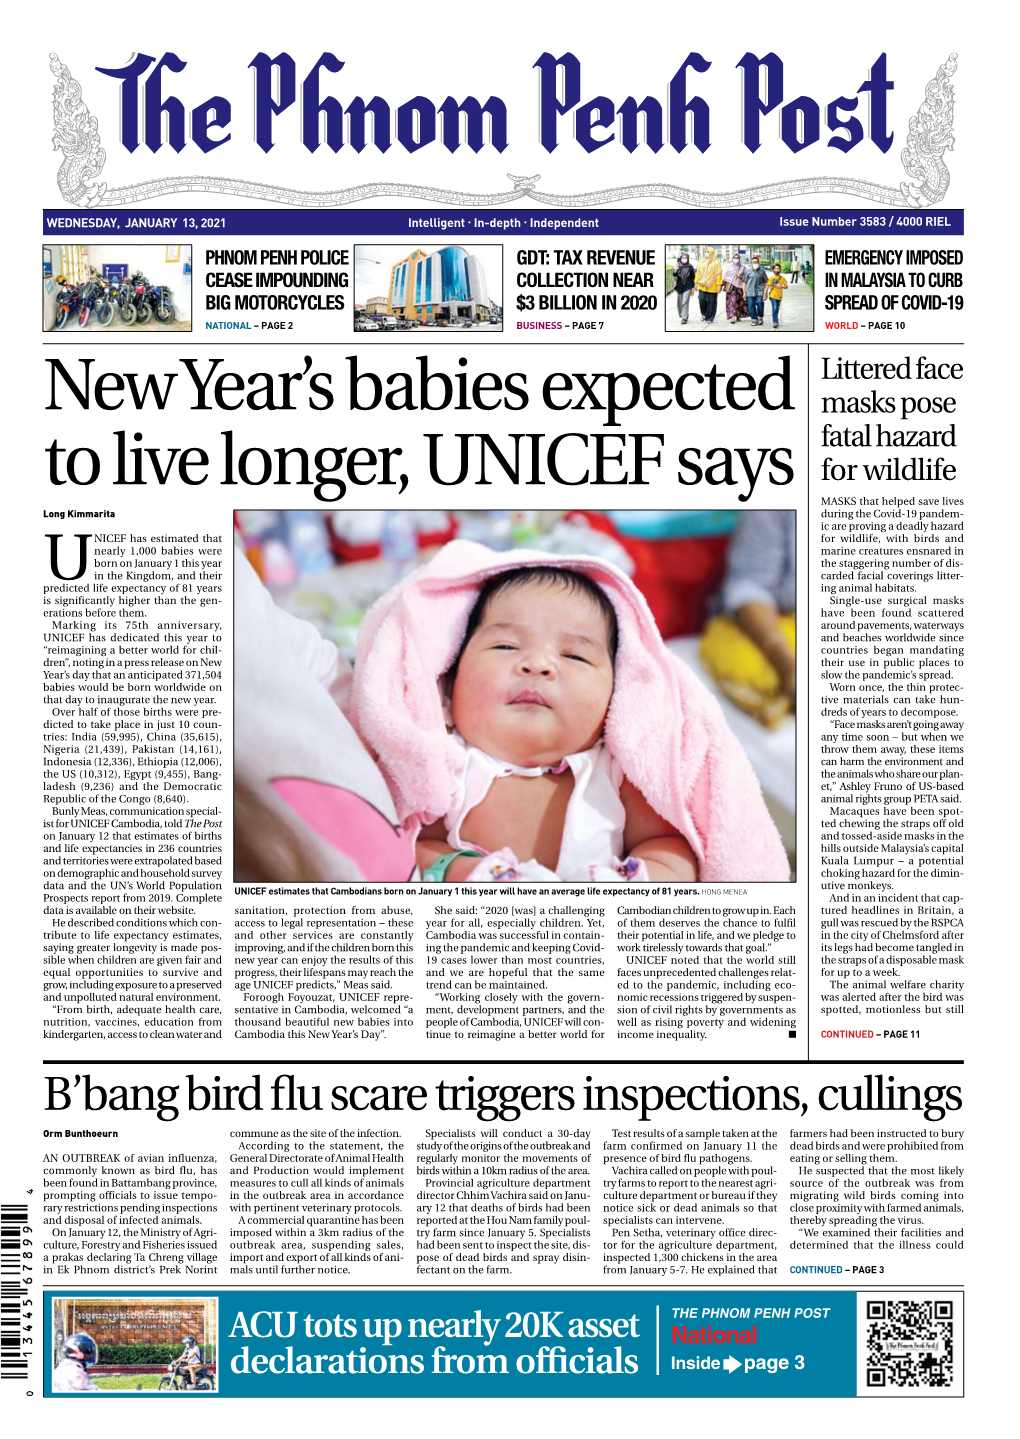 New Year's Babies Expected to Live Longer, Unicef Says